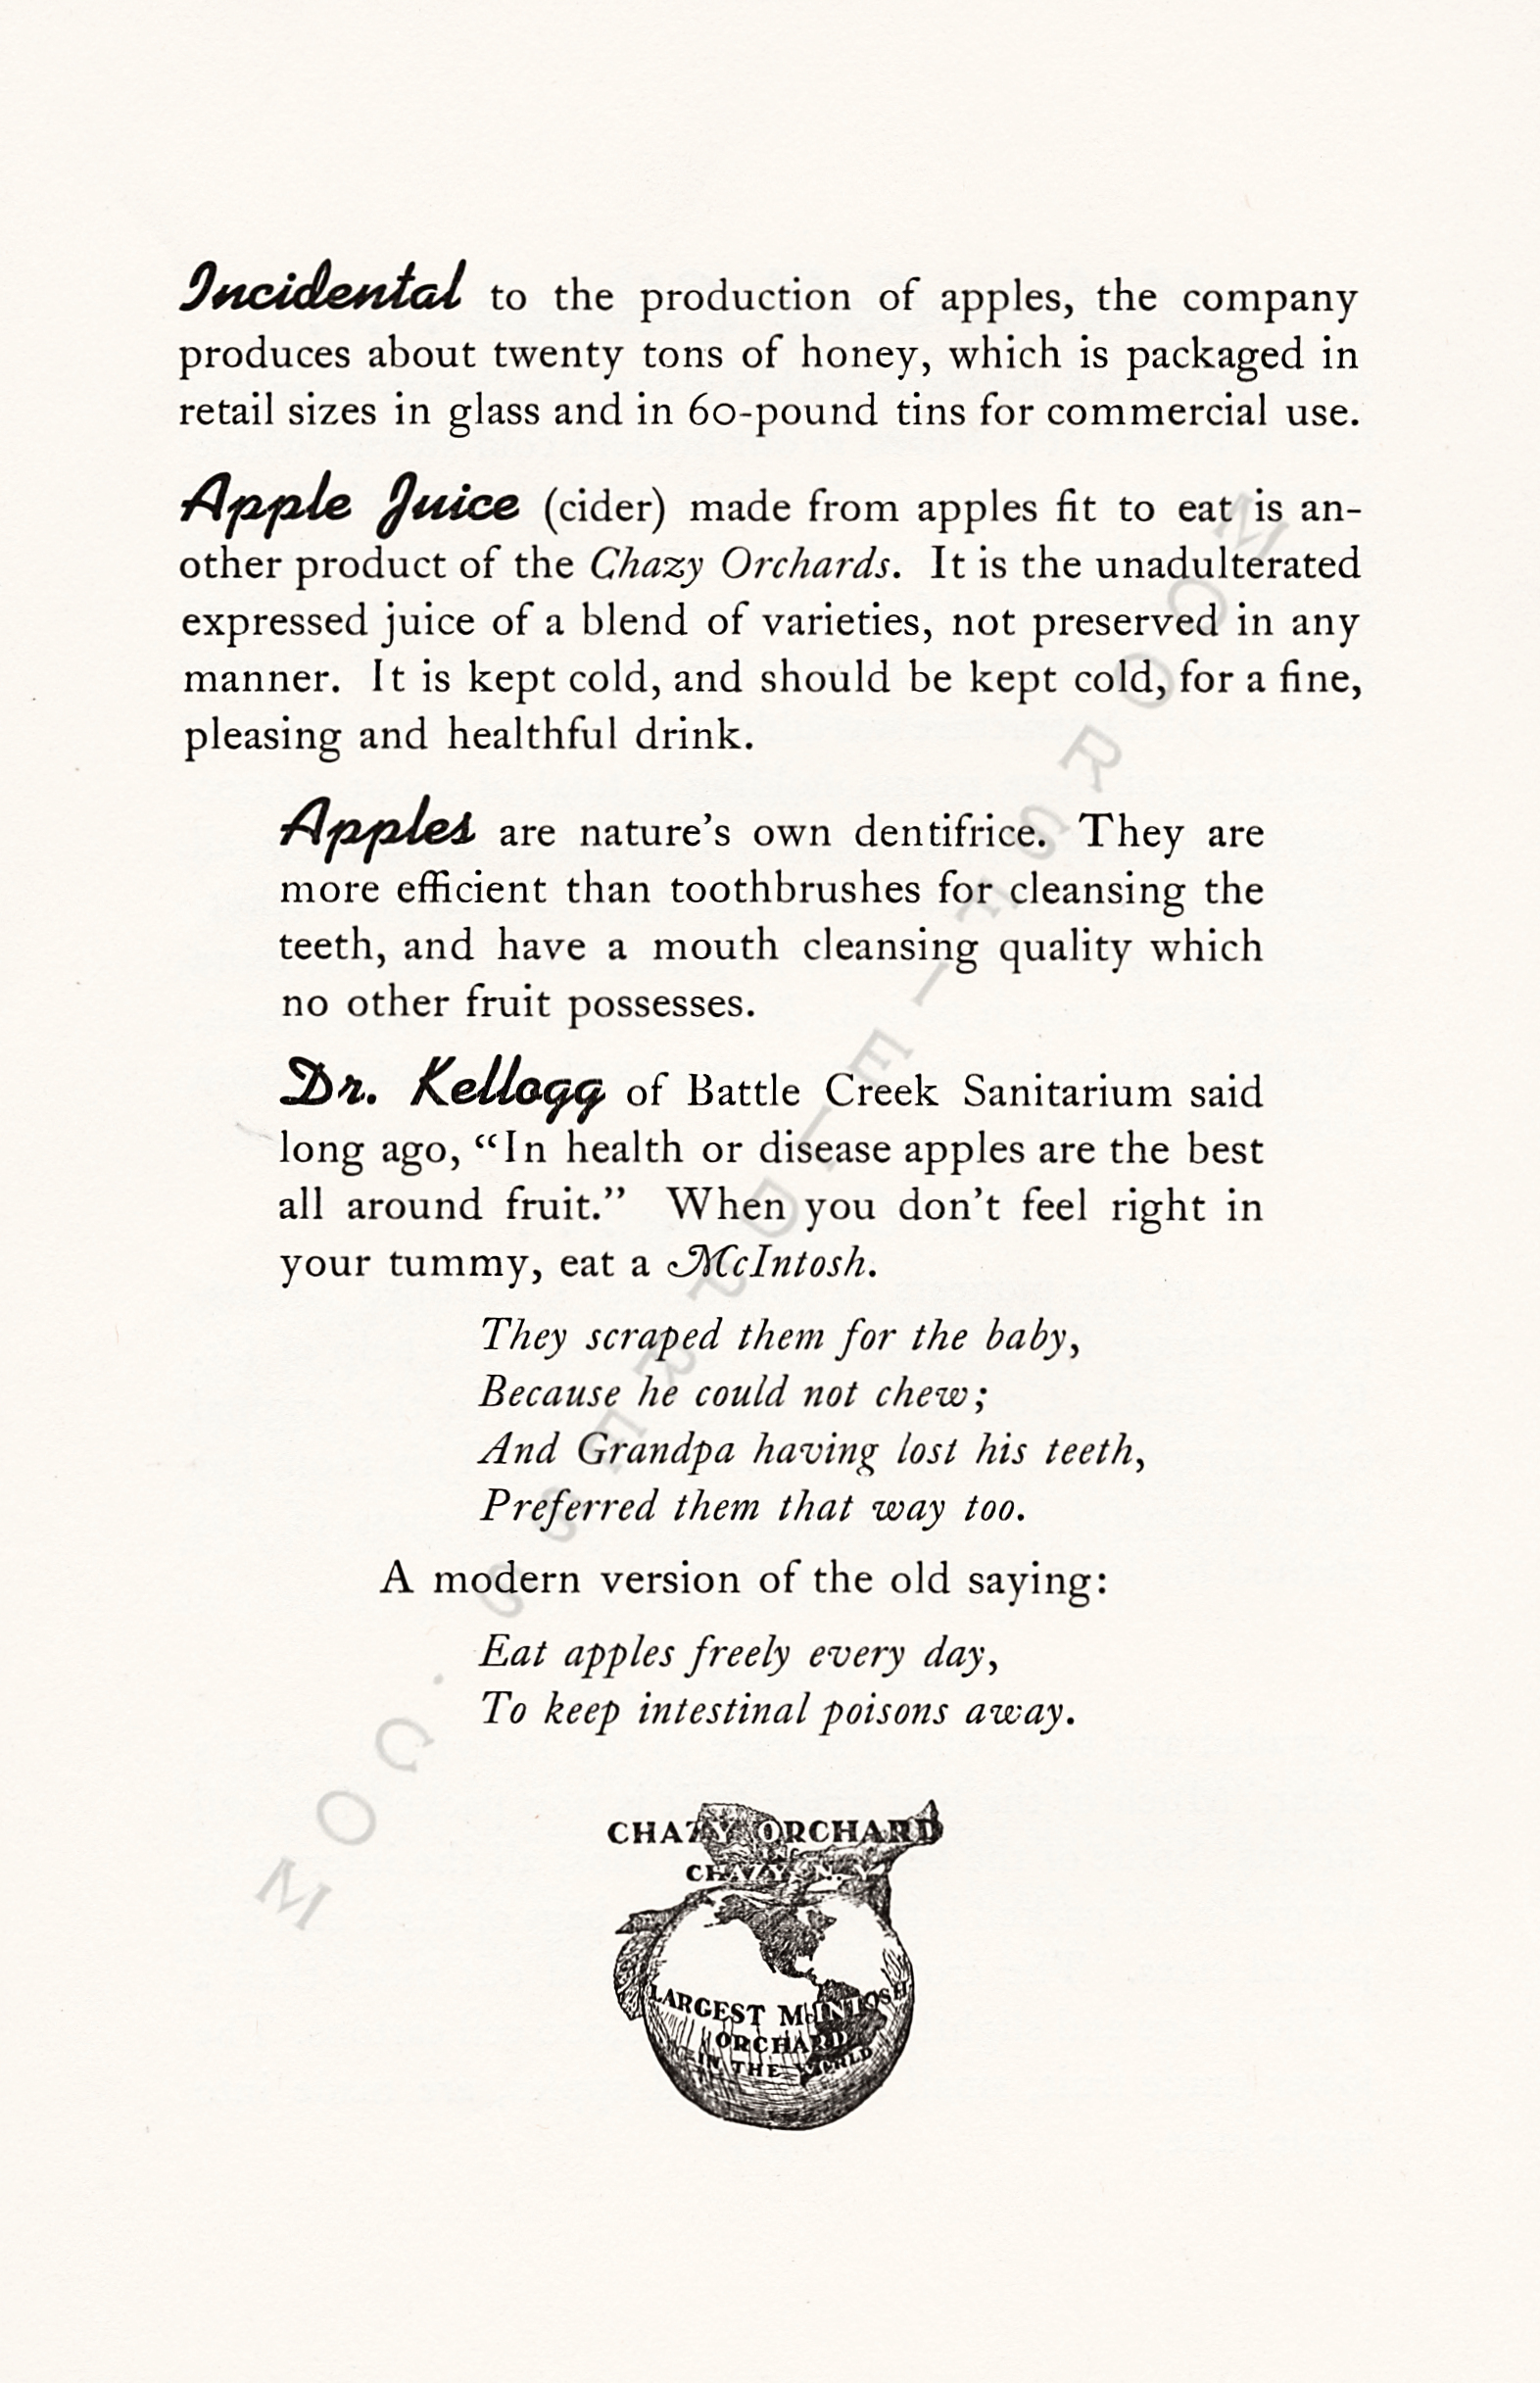 chazy orchards brochure 1957